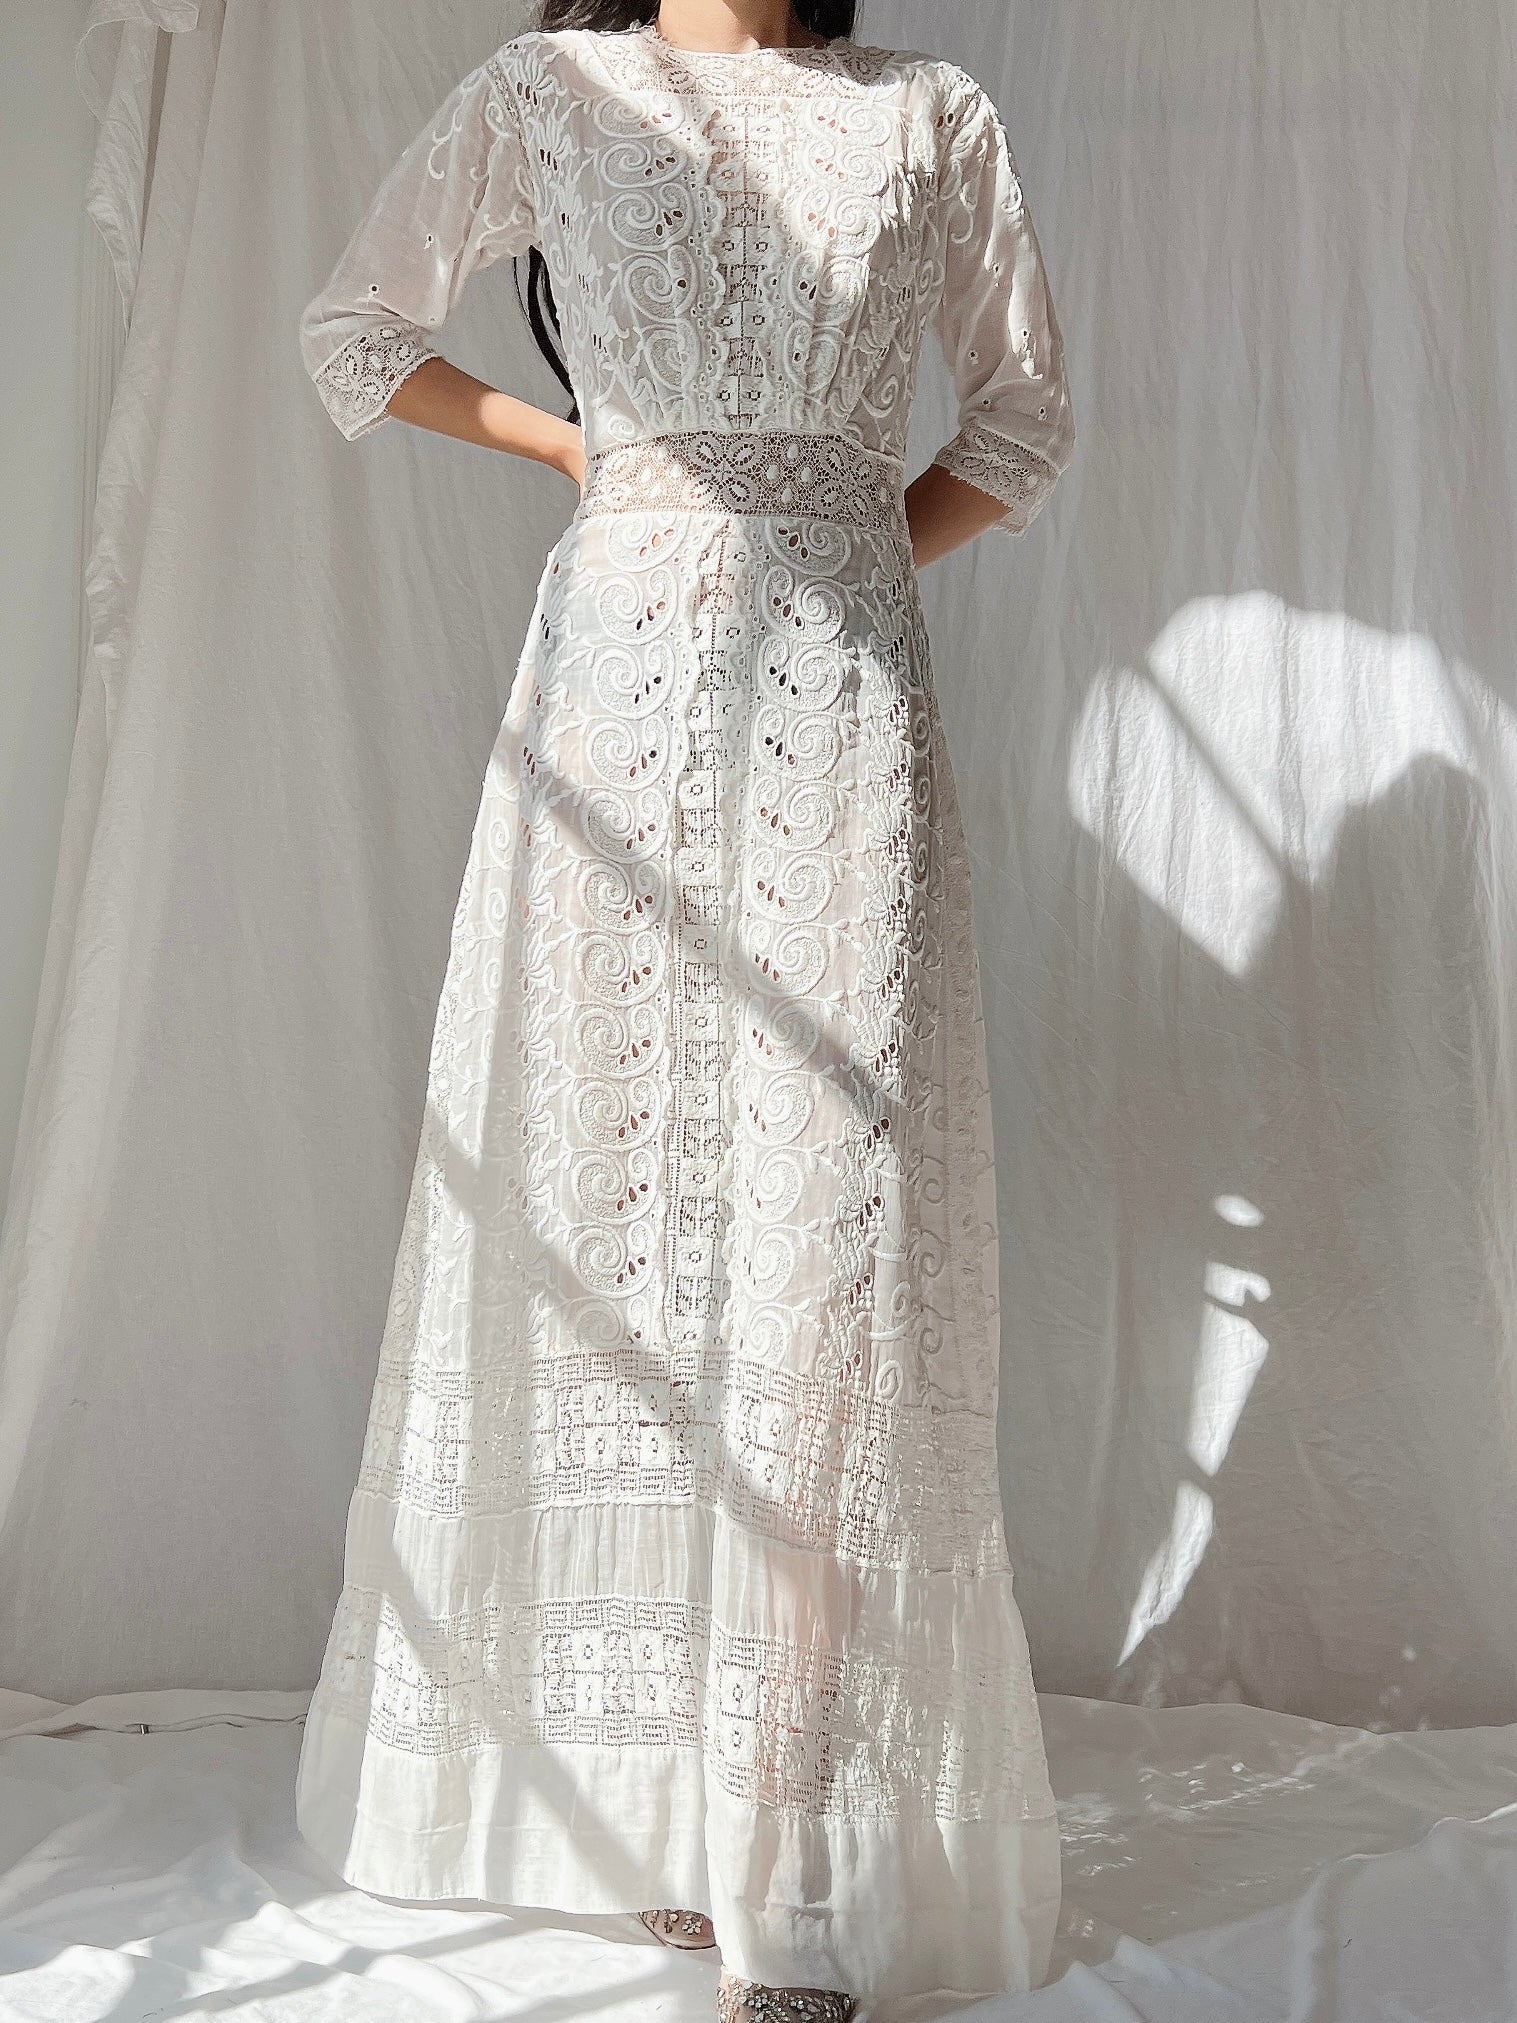 Antique Embroidered Cotton Dress - S